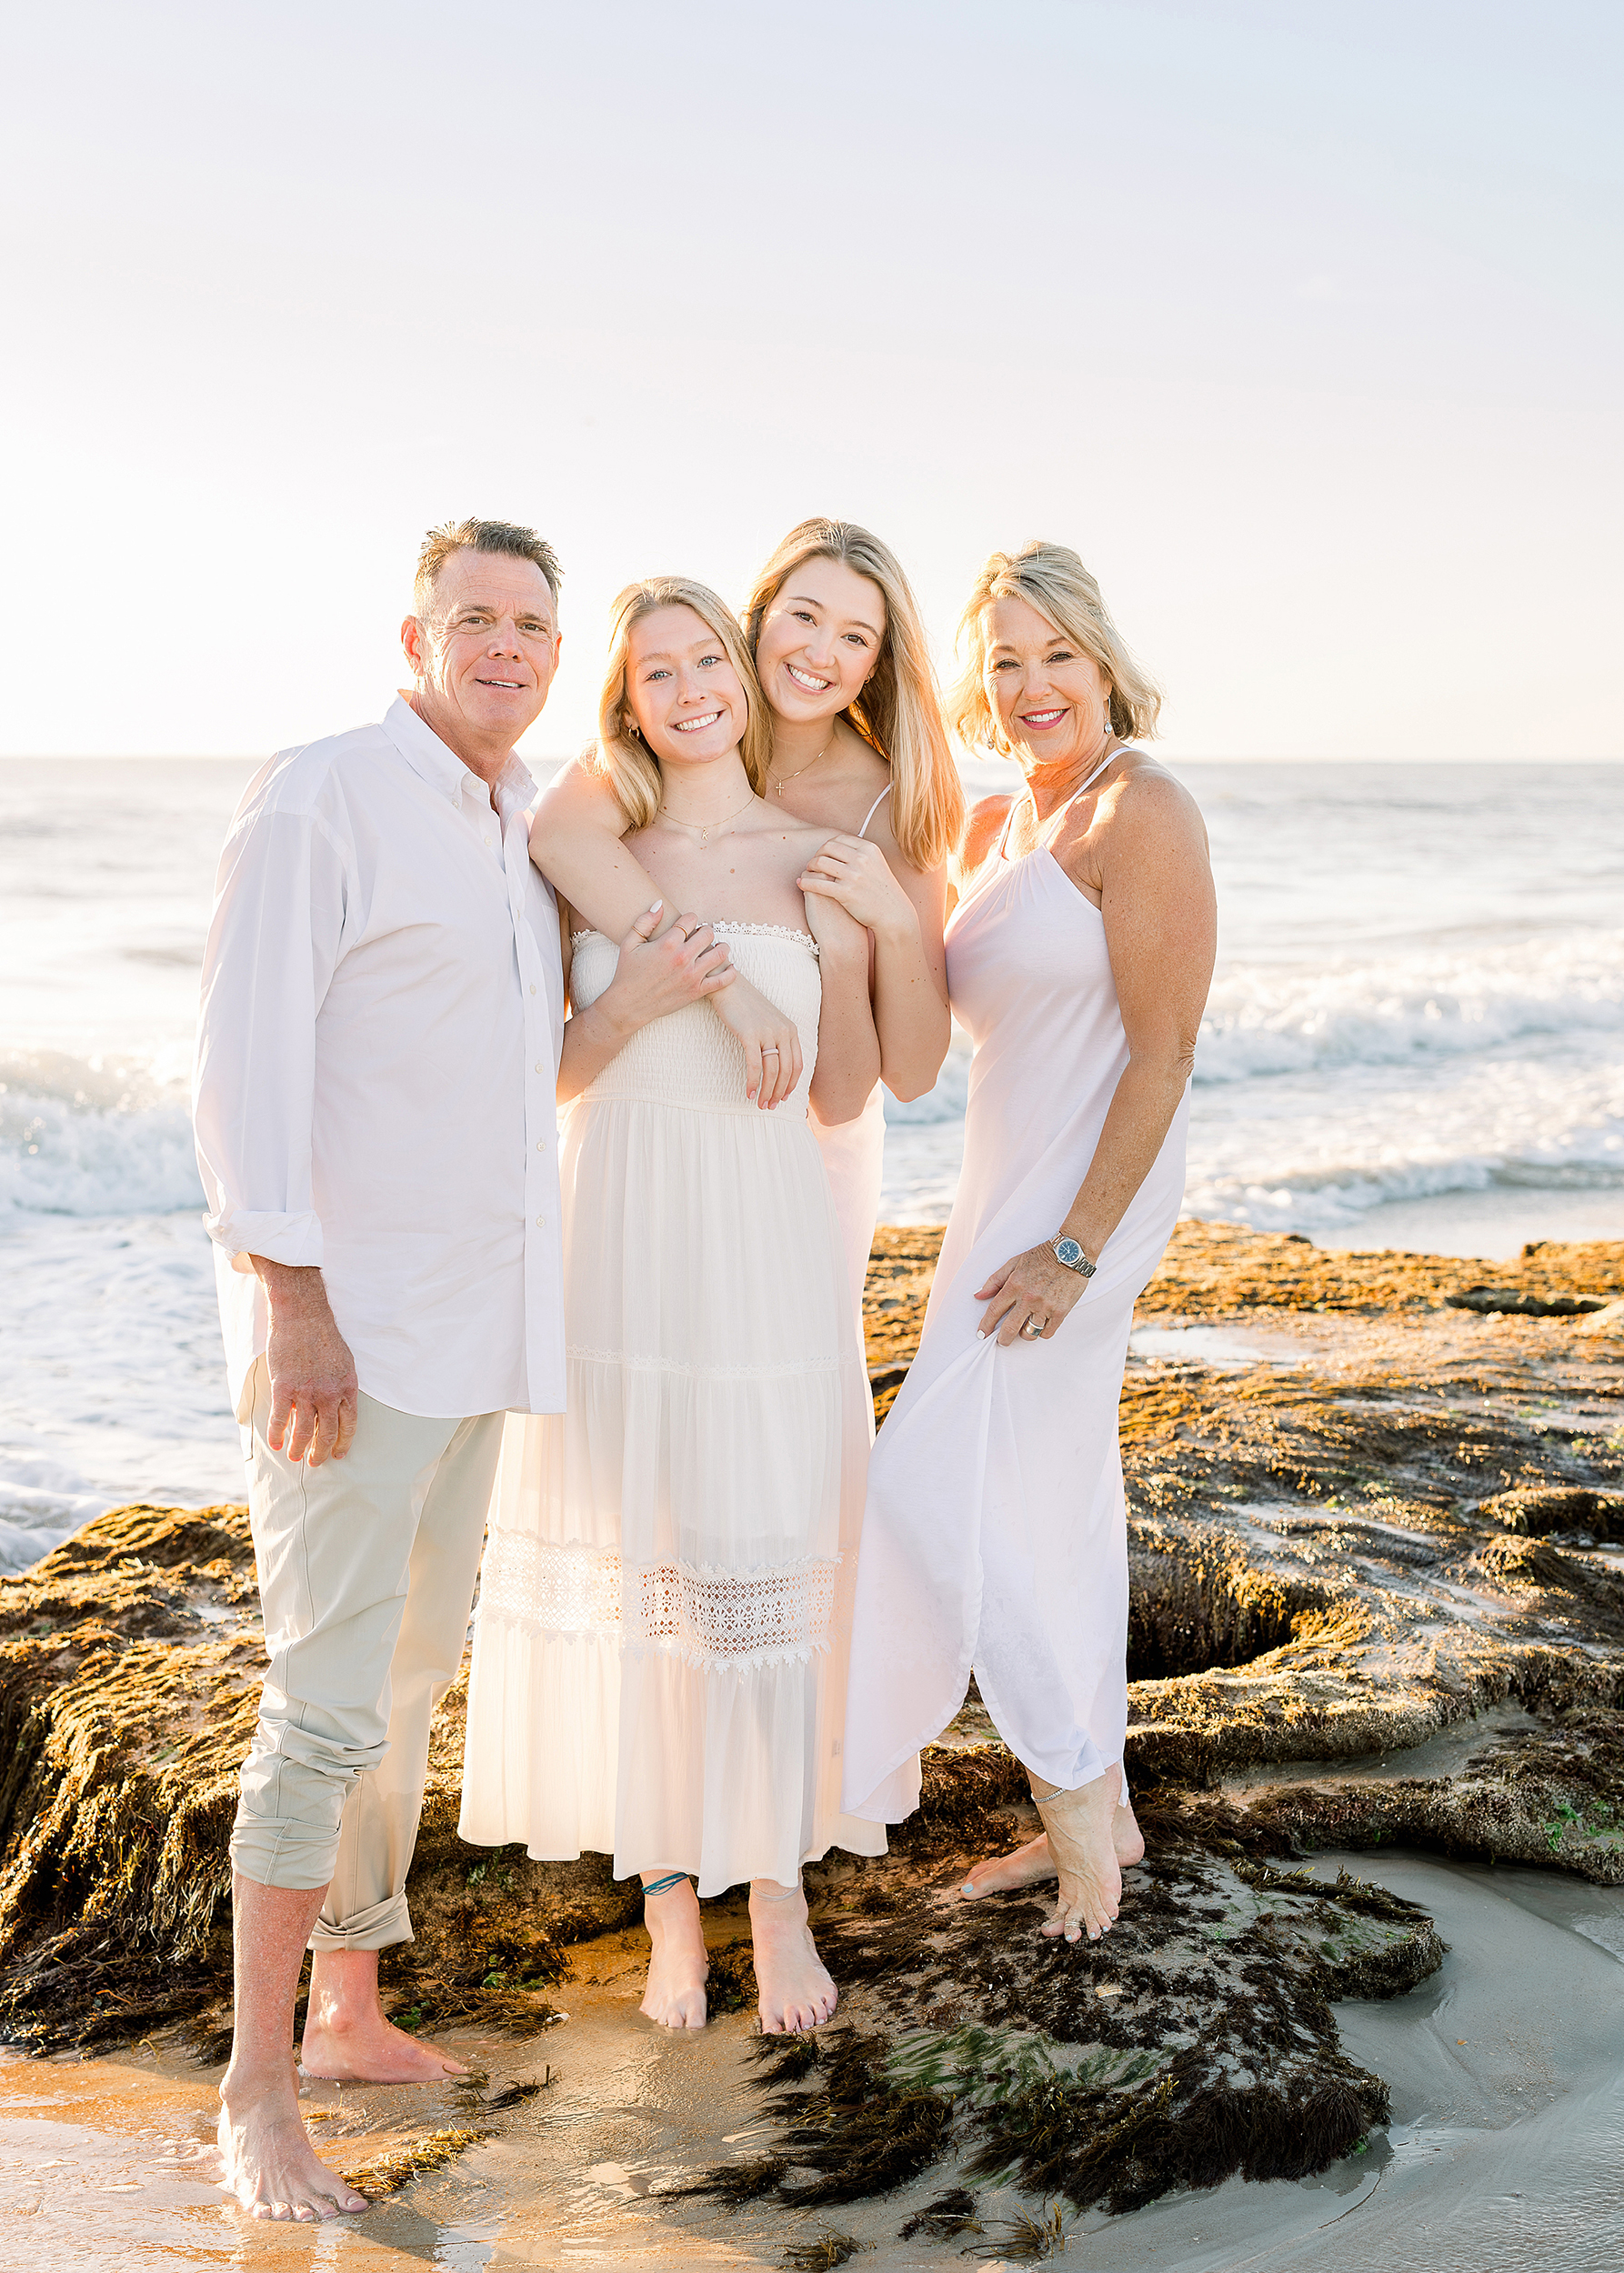 A sunrise portrait of a family of four standing on the rocks on the beach in Saint Augustine, Florida.